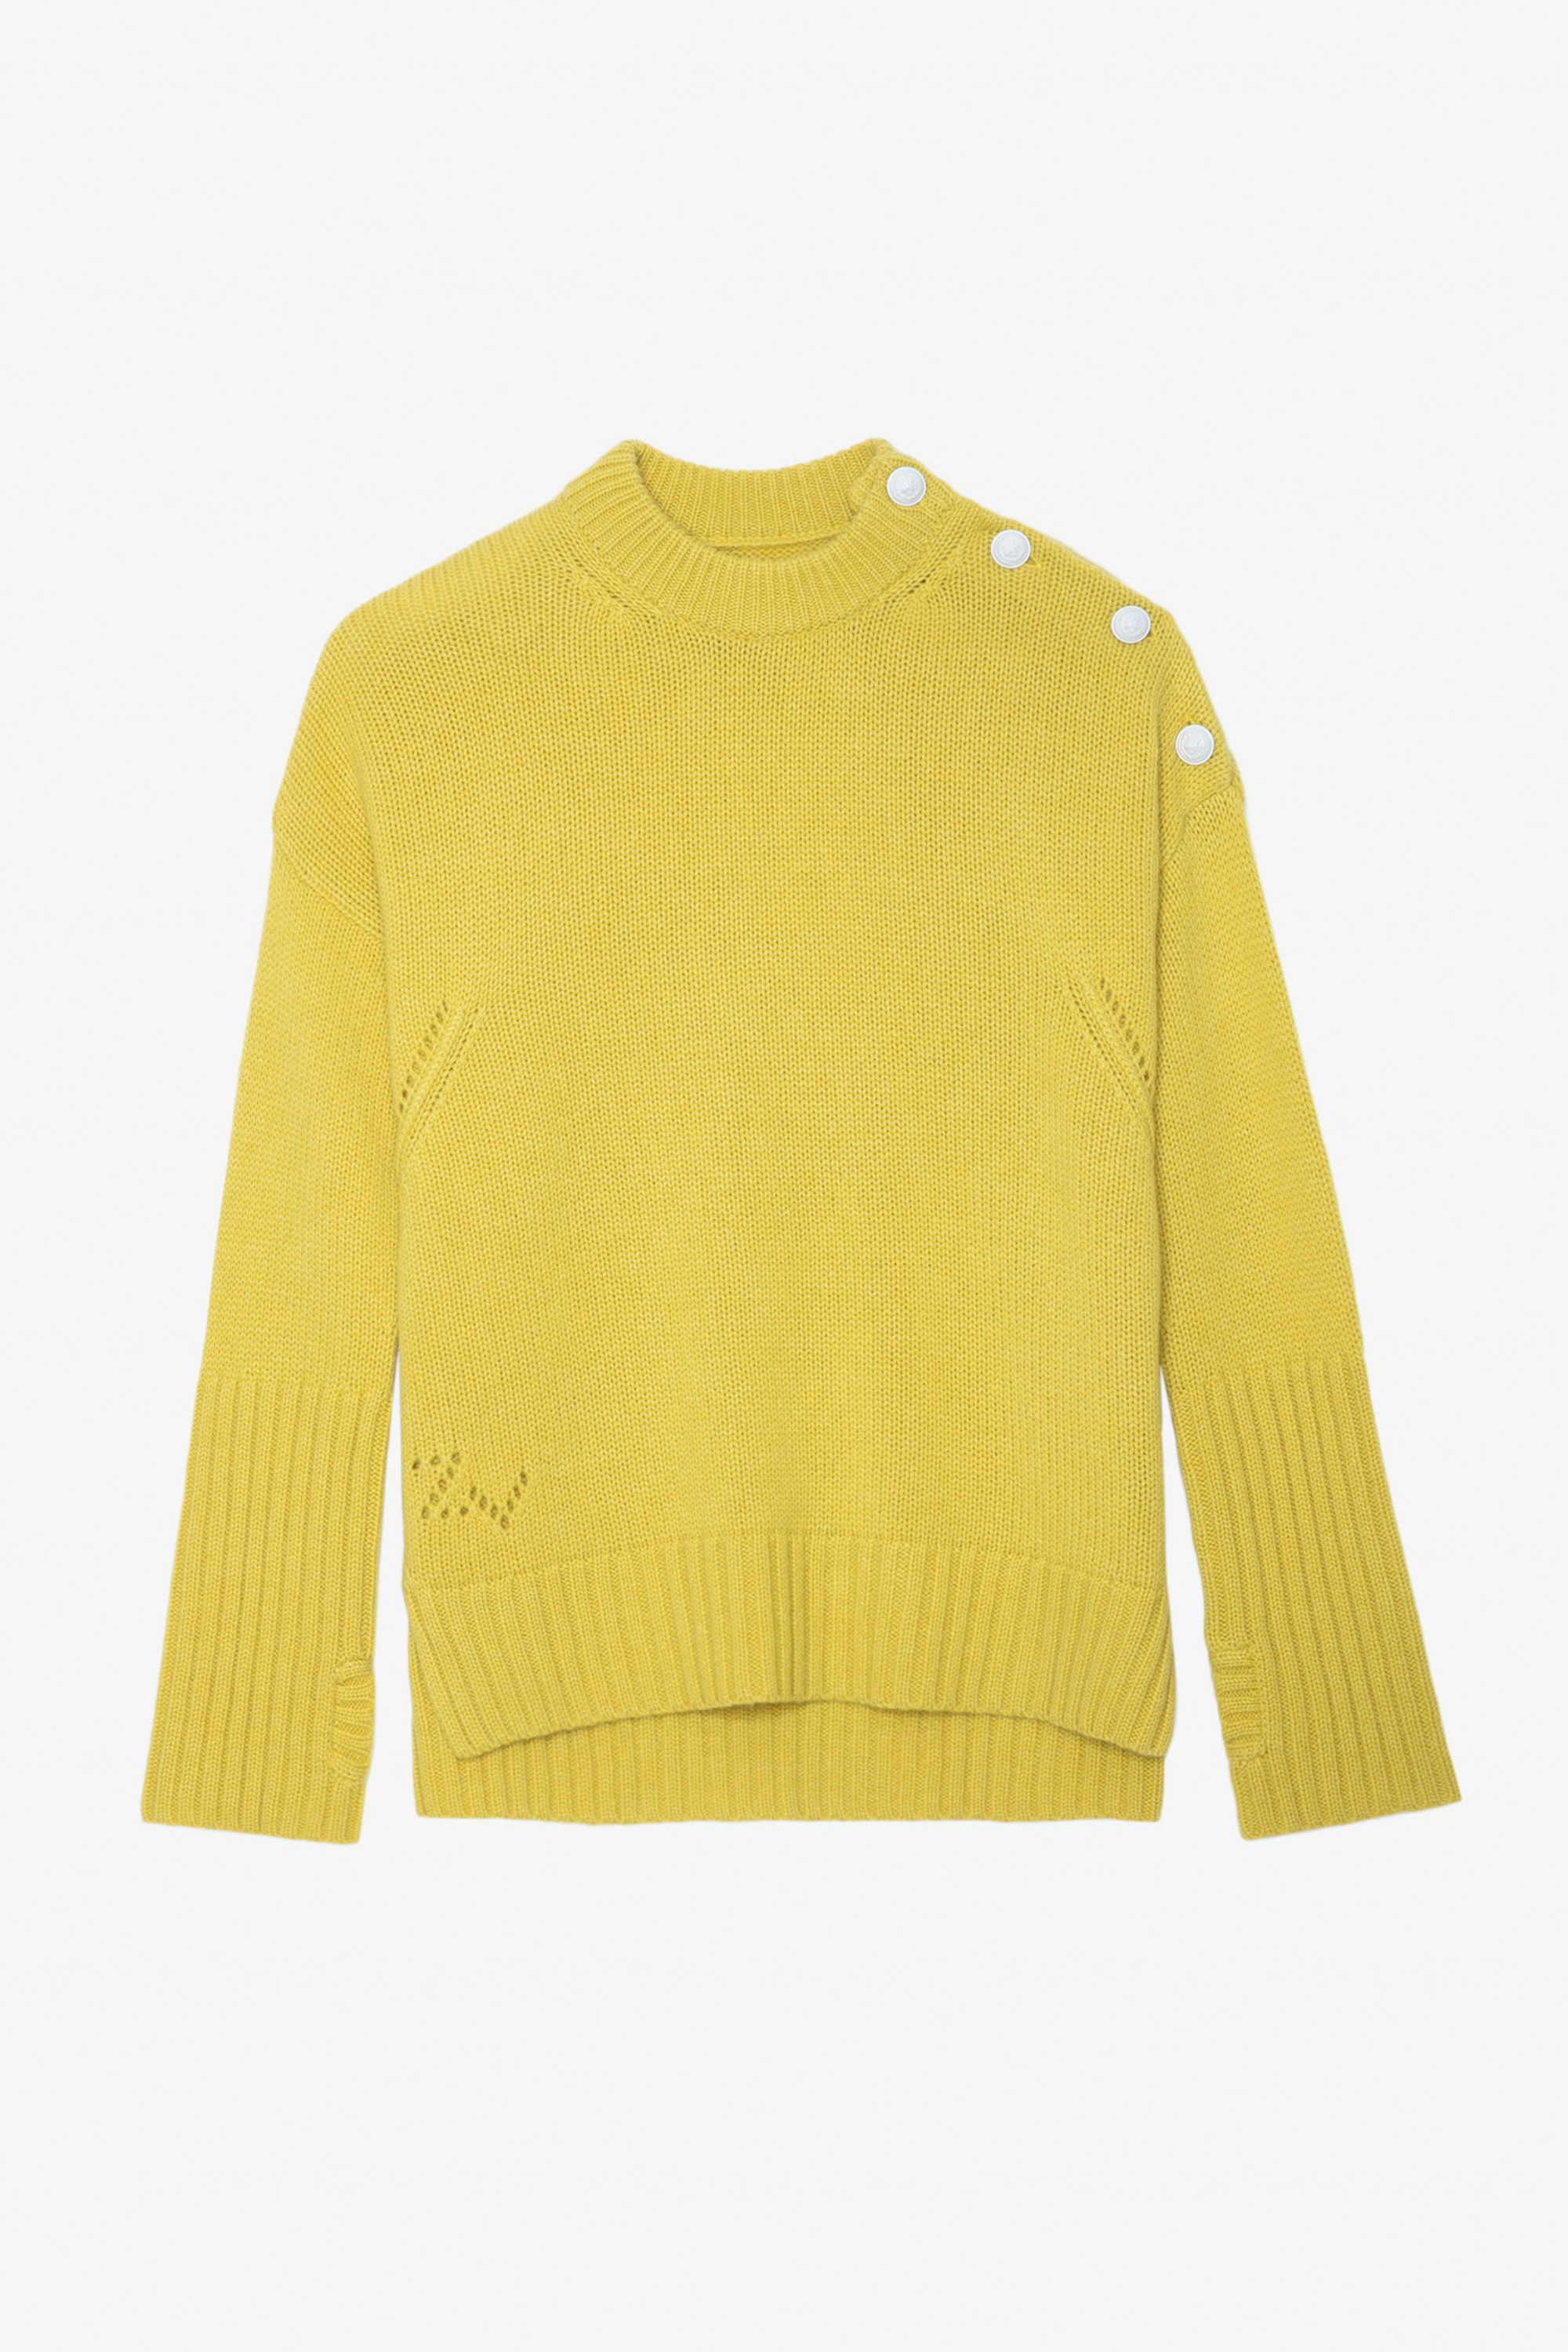 Malta Cashmere Jumper - Women’s yellow cashmere jumper with buttons on the shoulders.